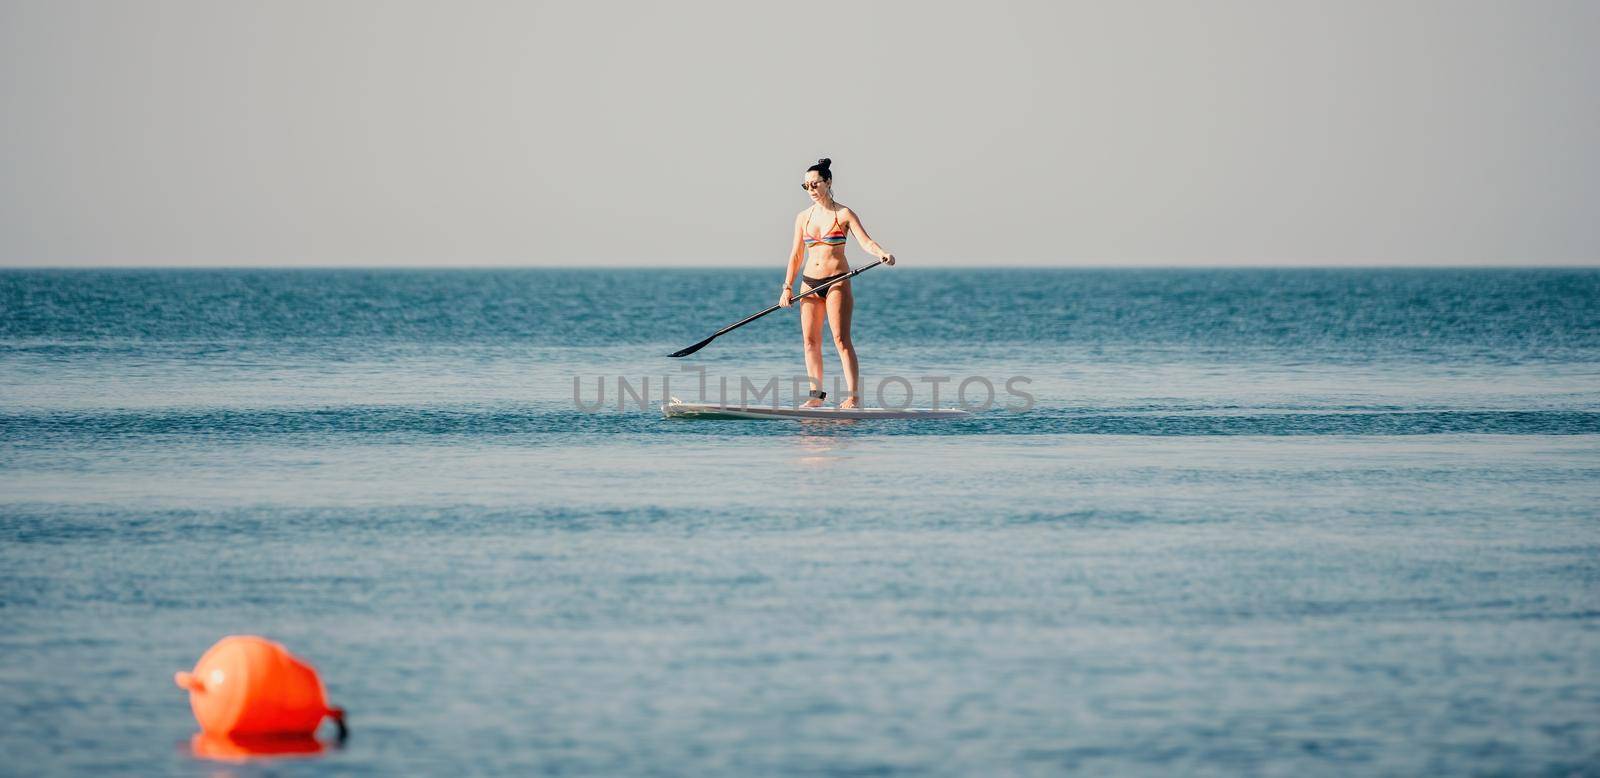 Sea woman sup. Silhouette of happy middle aged woman in rainbow bikini, surfing on SUP board, confident paddling through water surface. Idyllic sunset. Active lifestyle at sea or river. by panophotograph